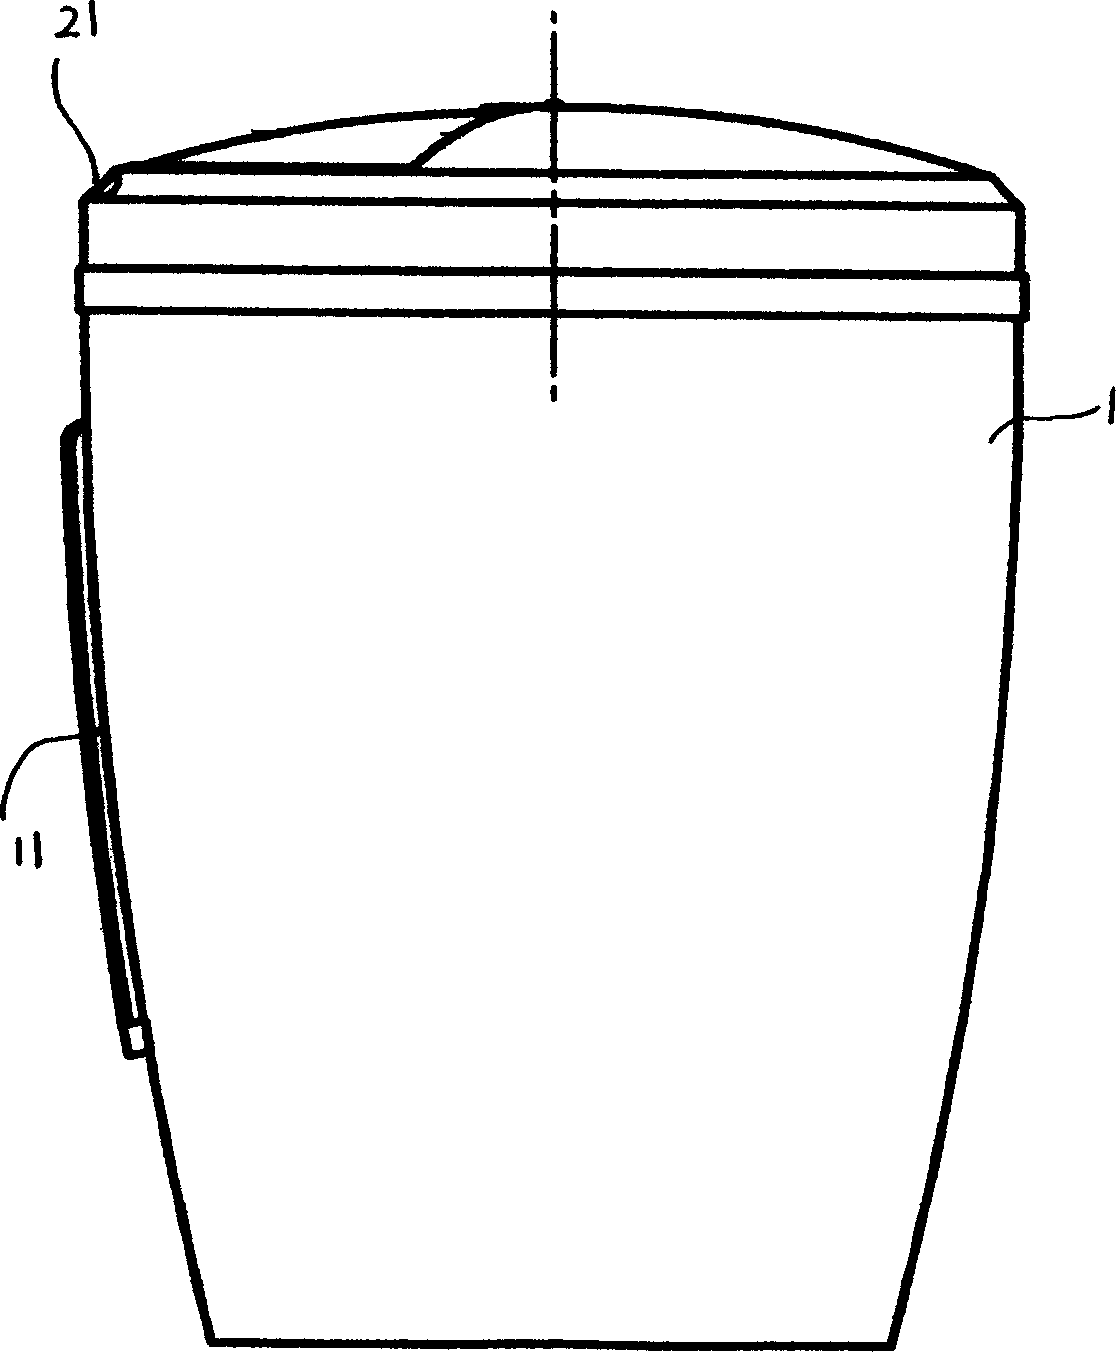 Garbage can having induction type automatic open close cover